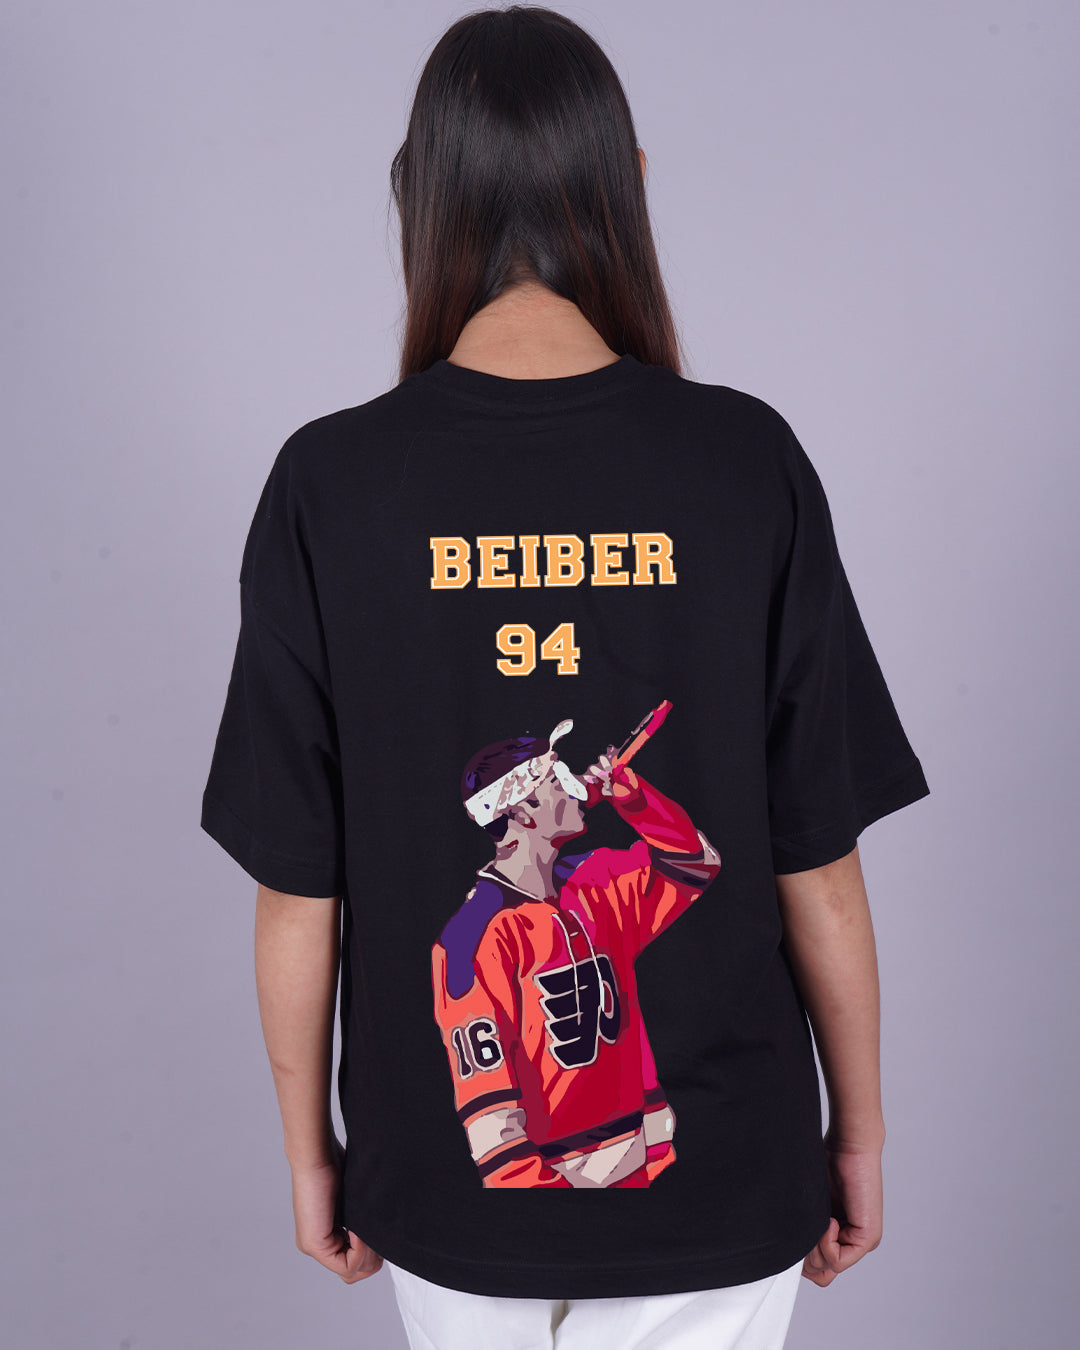 Justin Bieber Duo: Oversized Tees - Bieber 94 & What Do You Mean (Pack of 2)